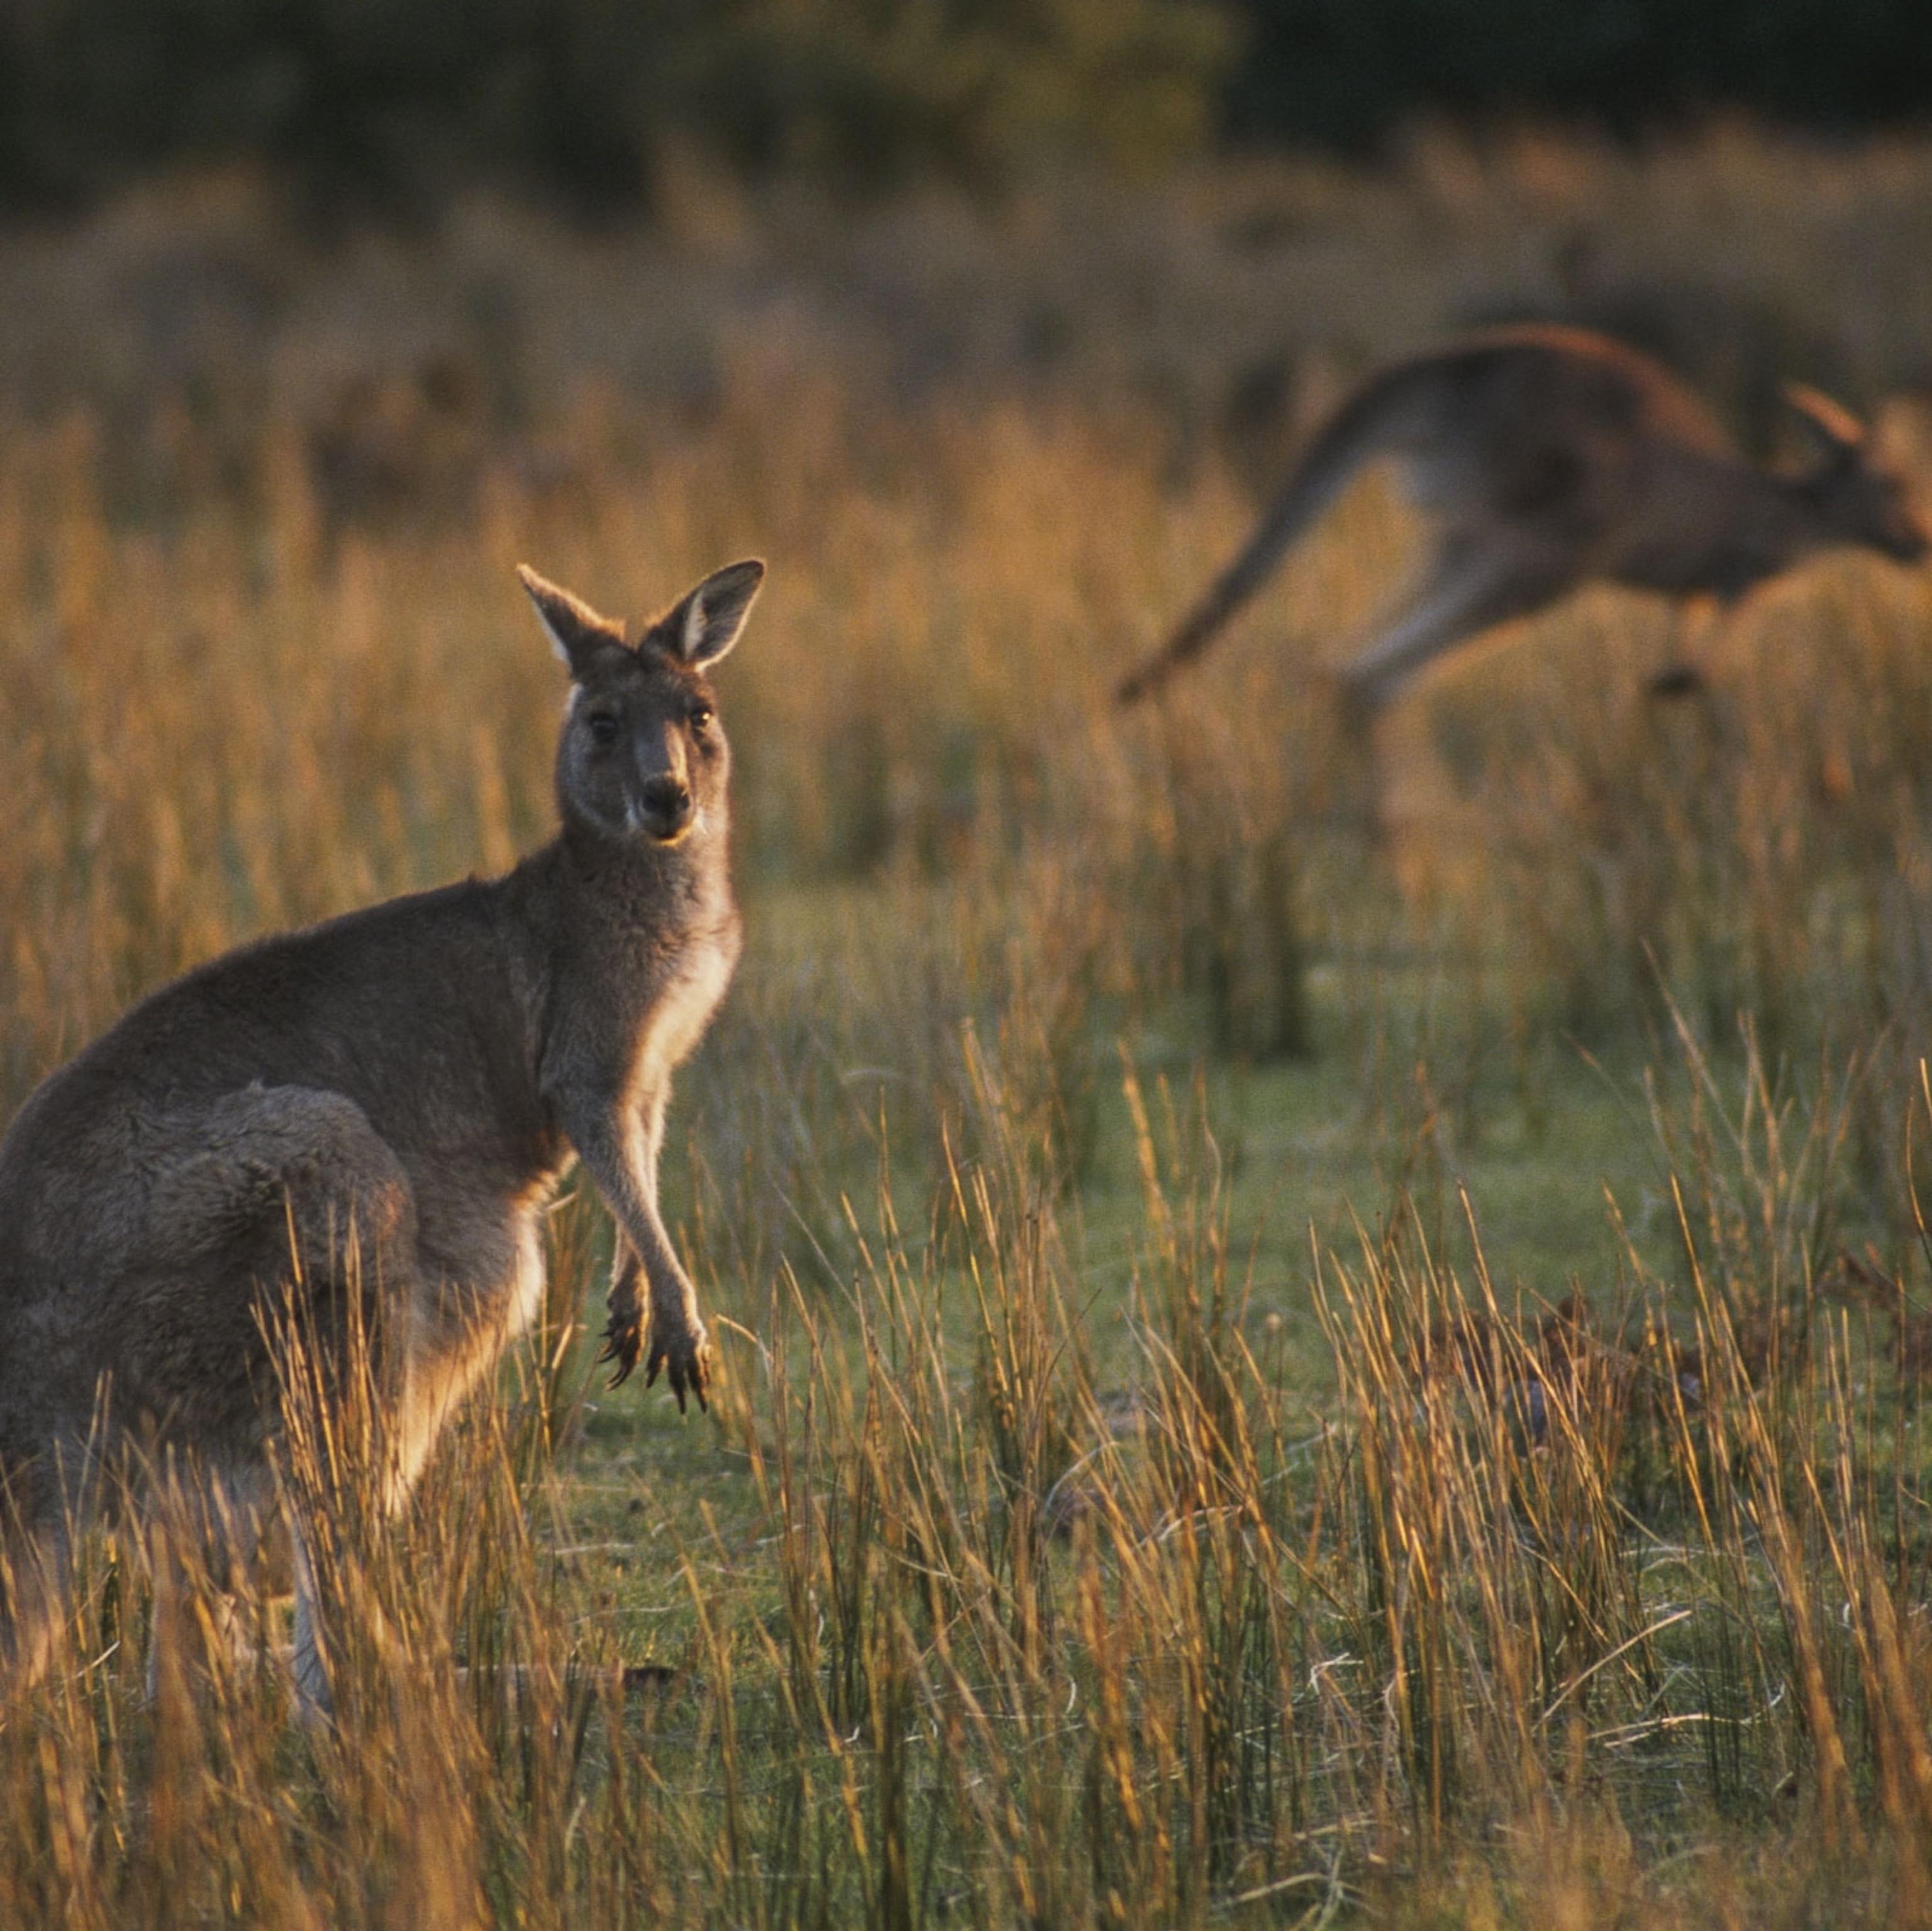 Hunting Kangaroos in Australia Drives Controversy